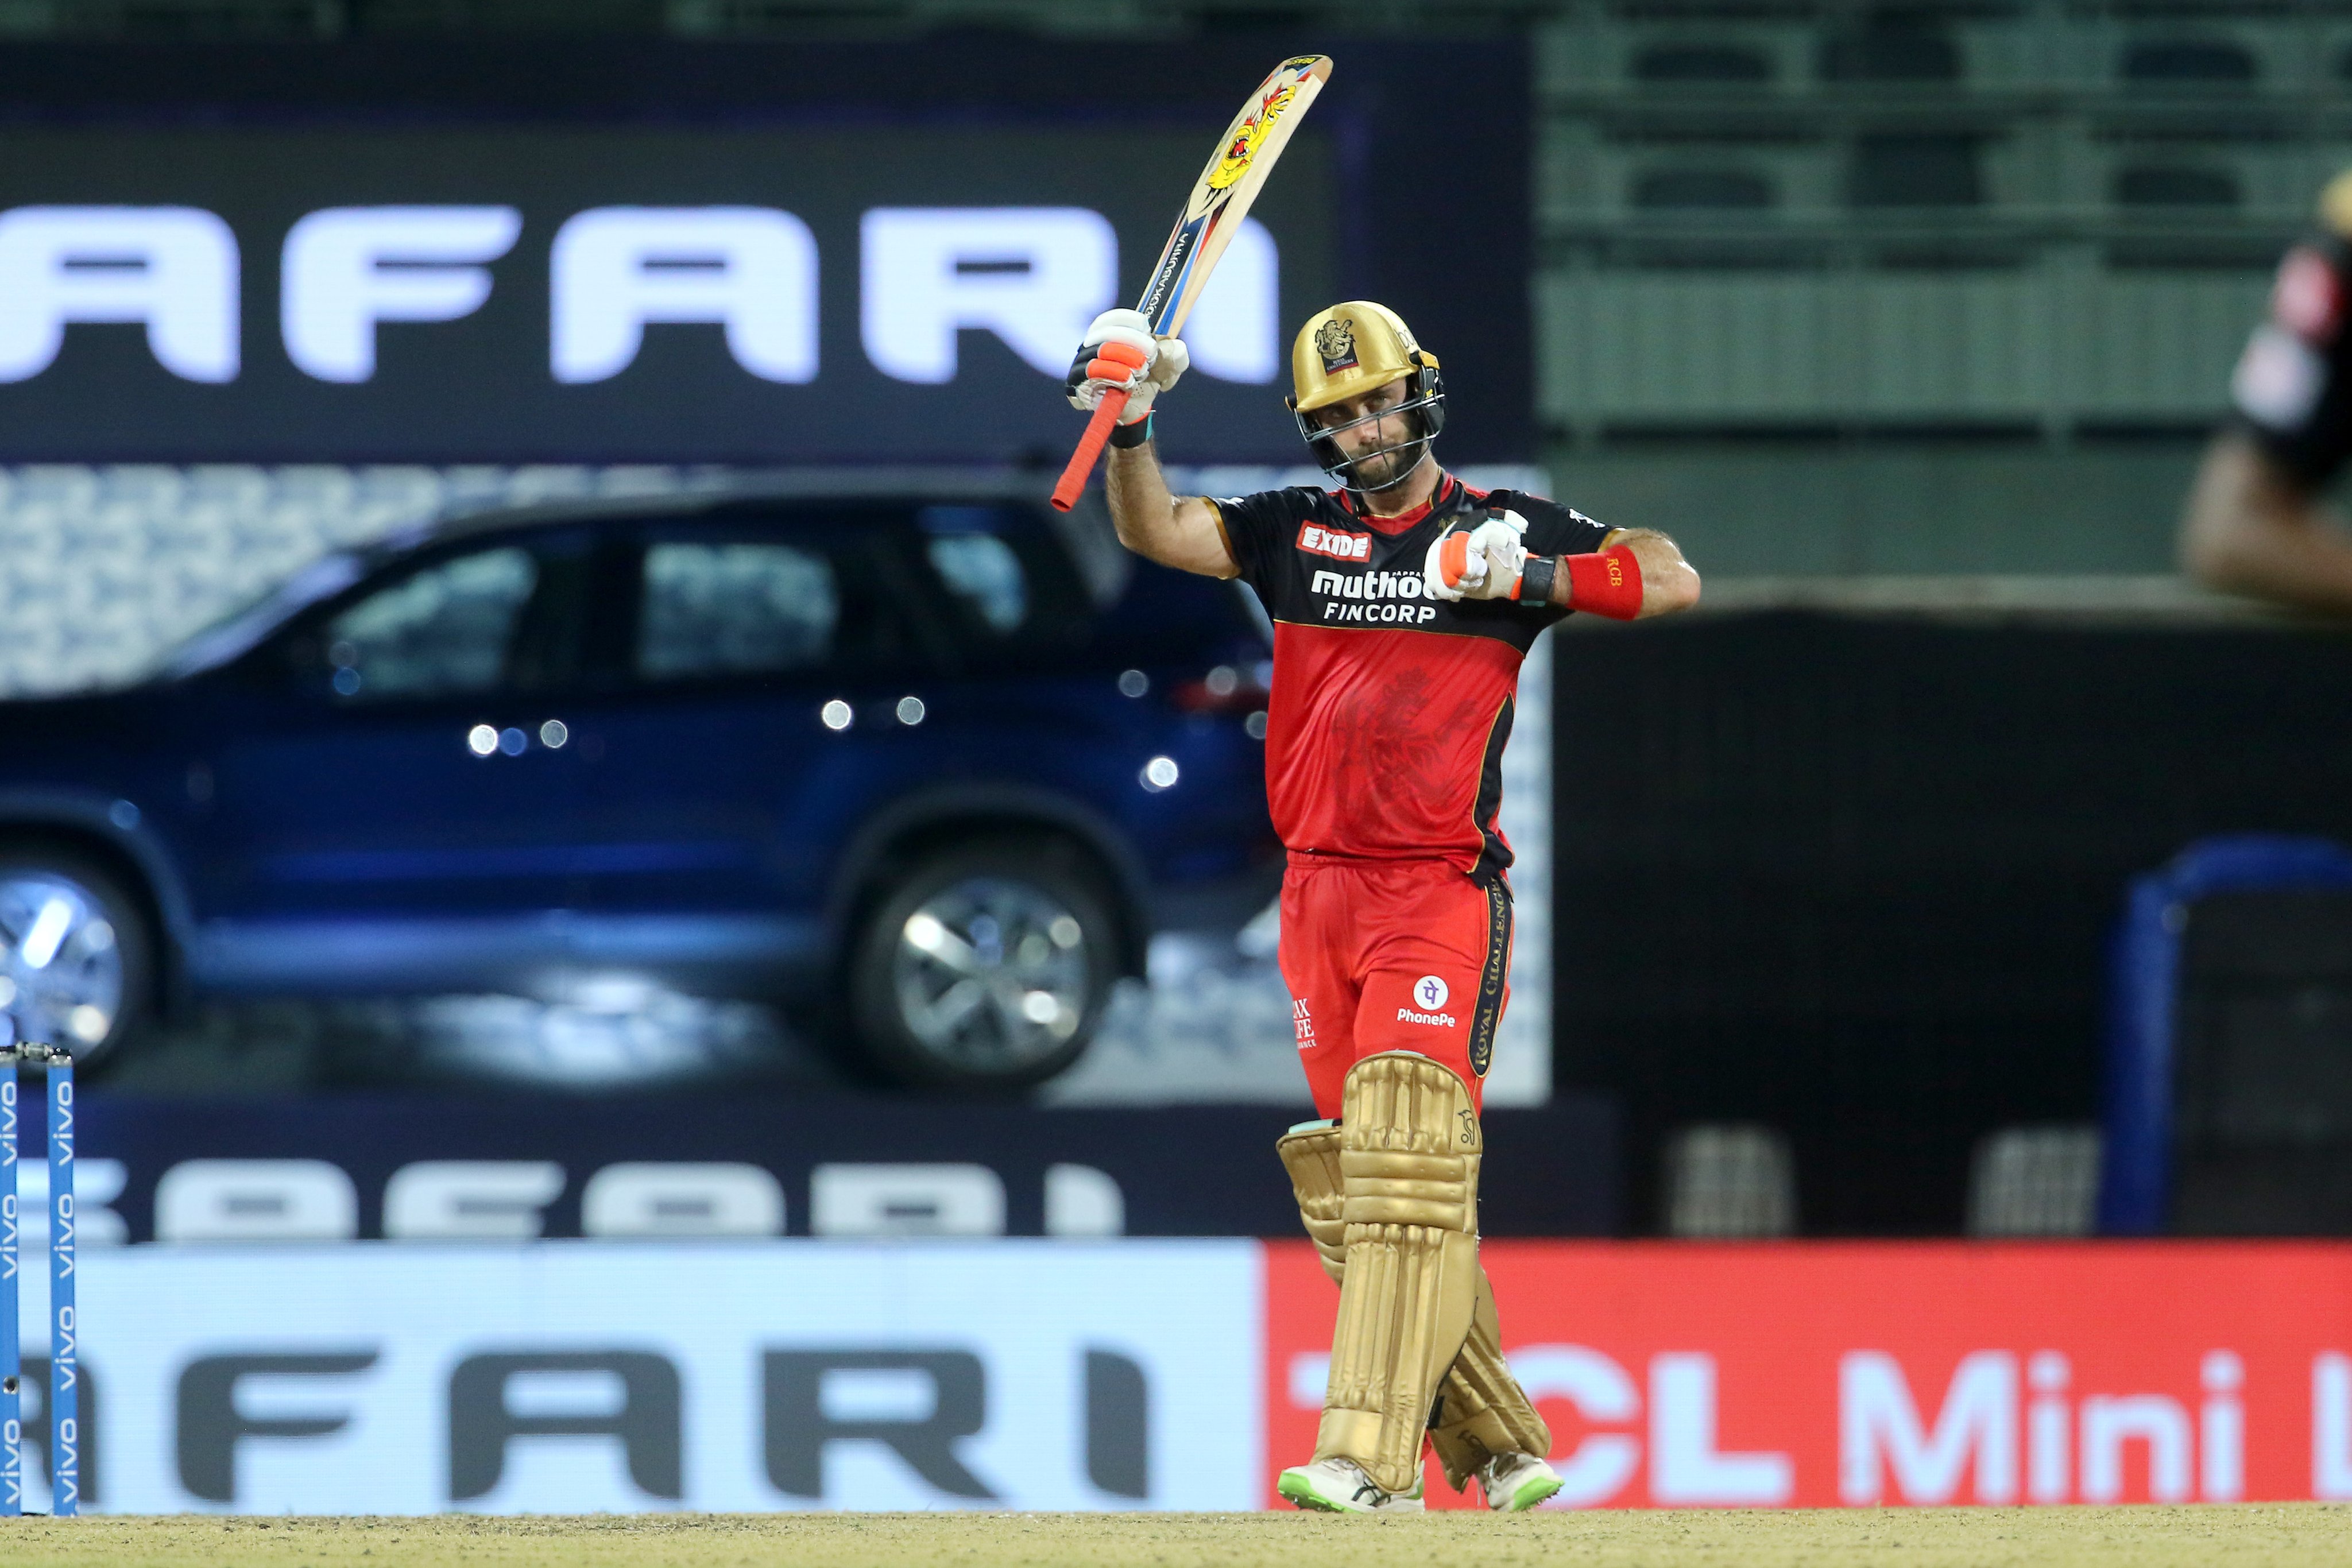 IPL 2021 | Royal Challengers Bangalore vs Punjab Kings - BONS preview, head to head, where to watch, and betting tips